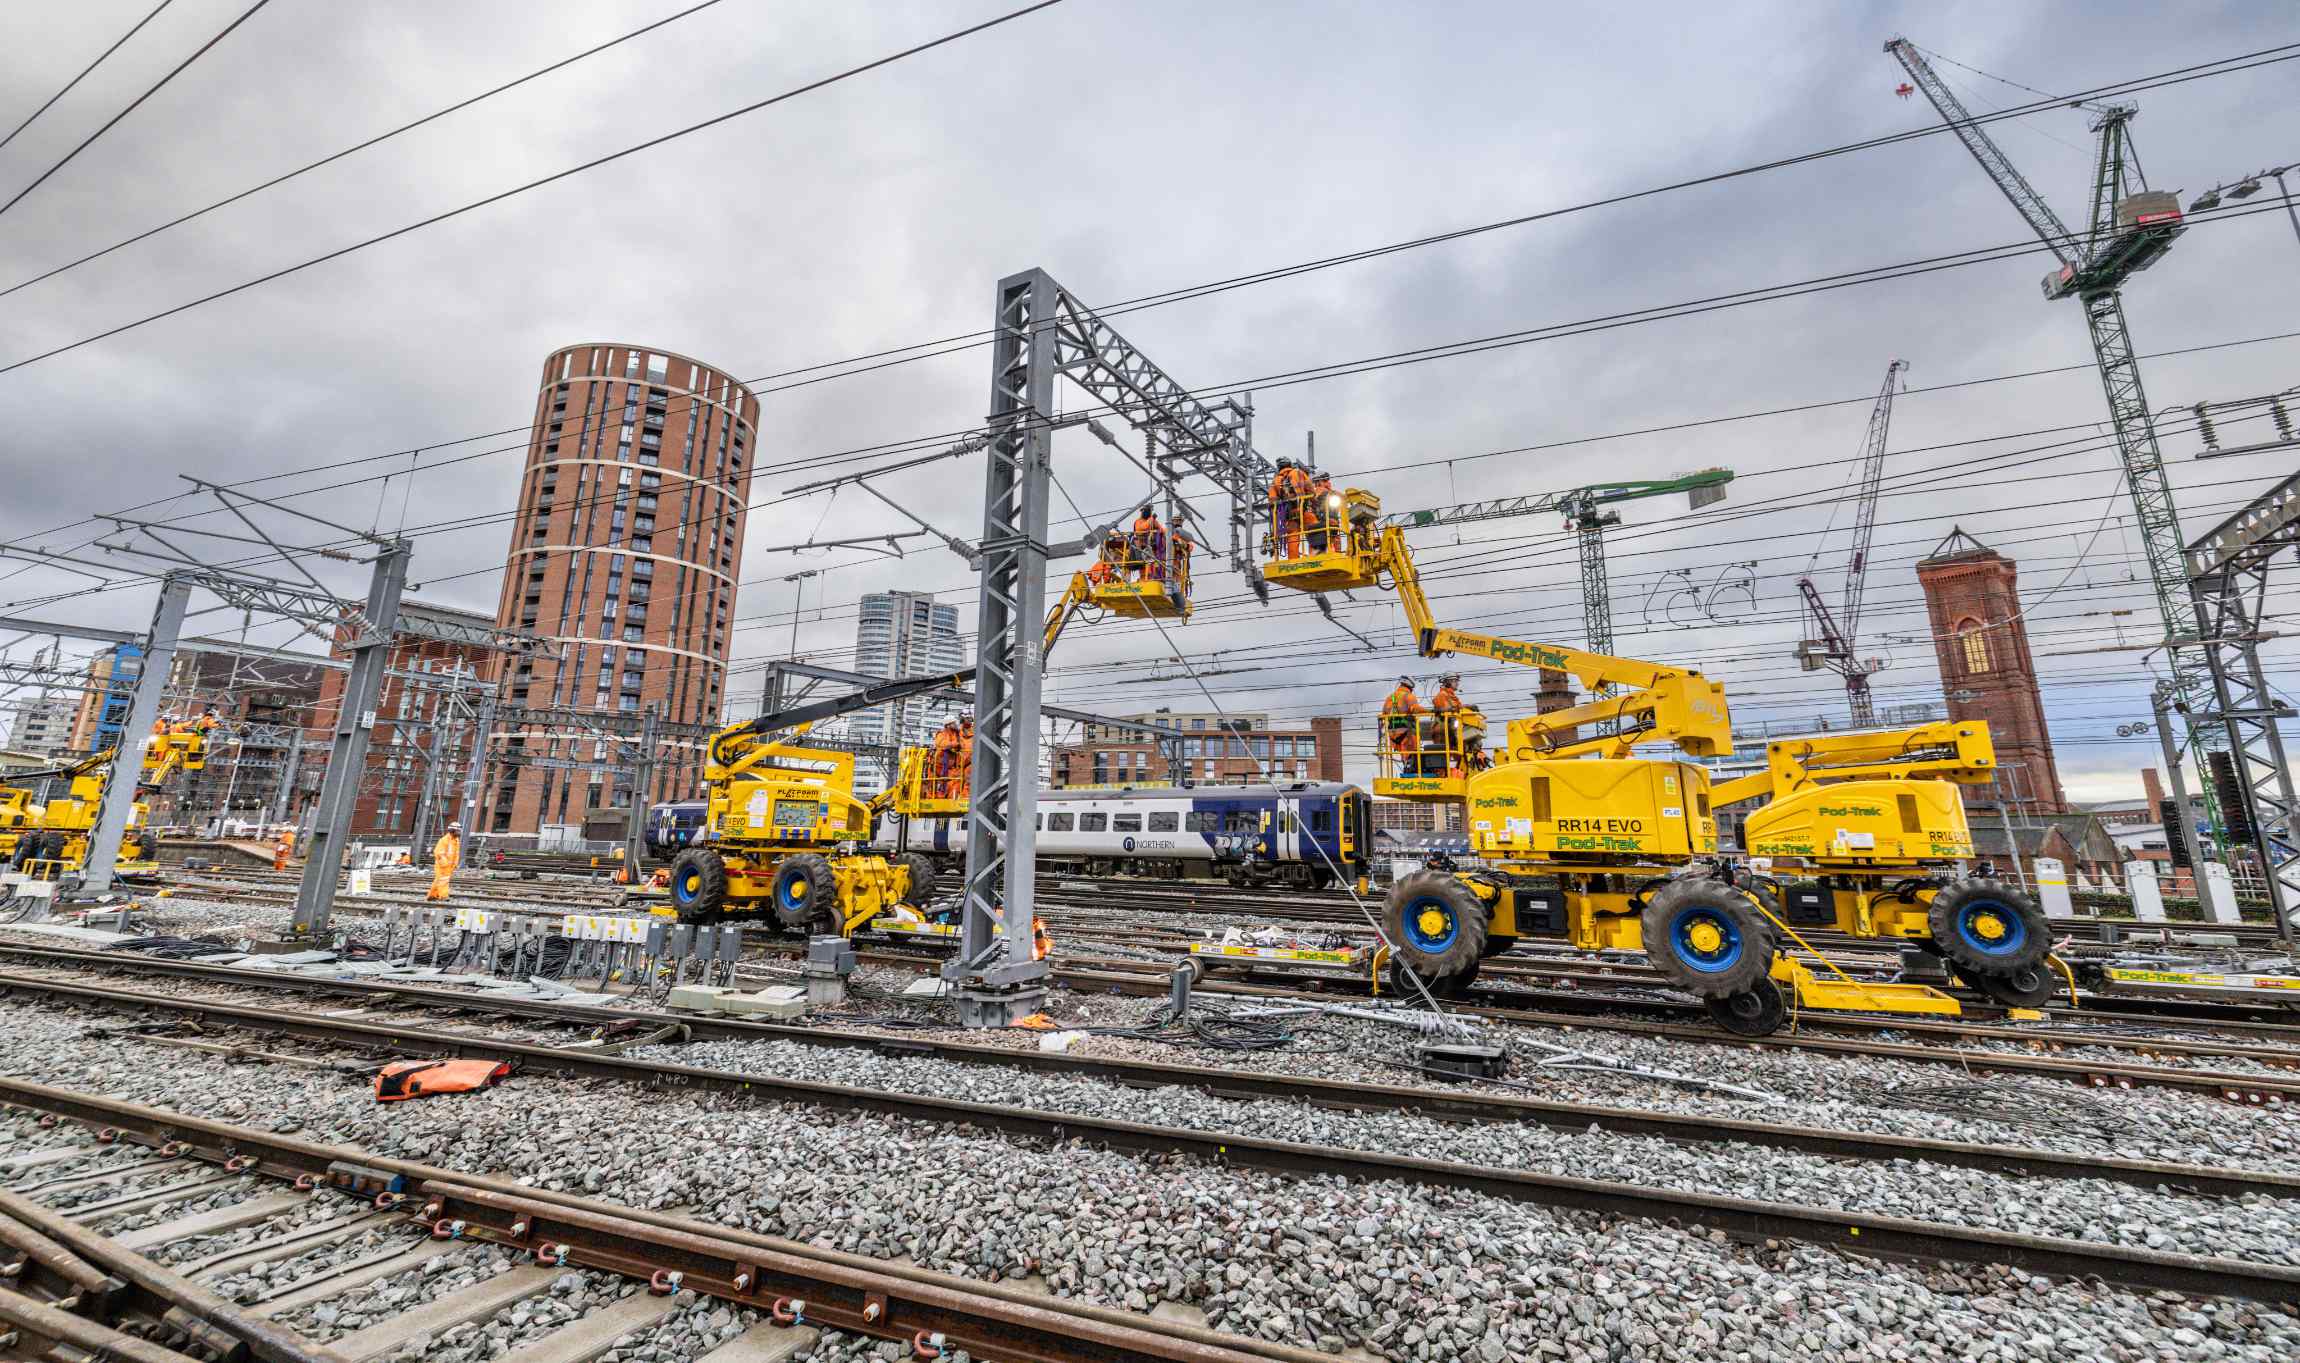 Network Rail complete biggest track upgrade at Leeds station in 20 years